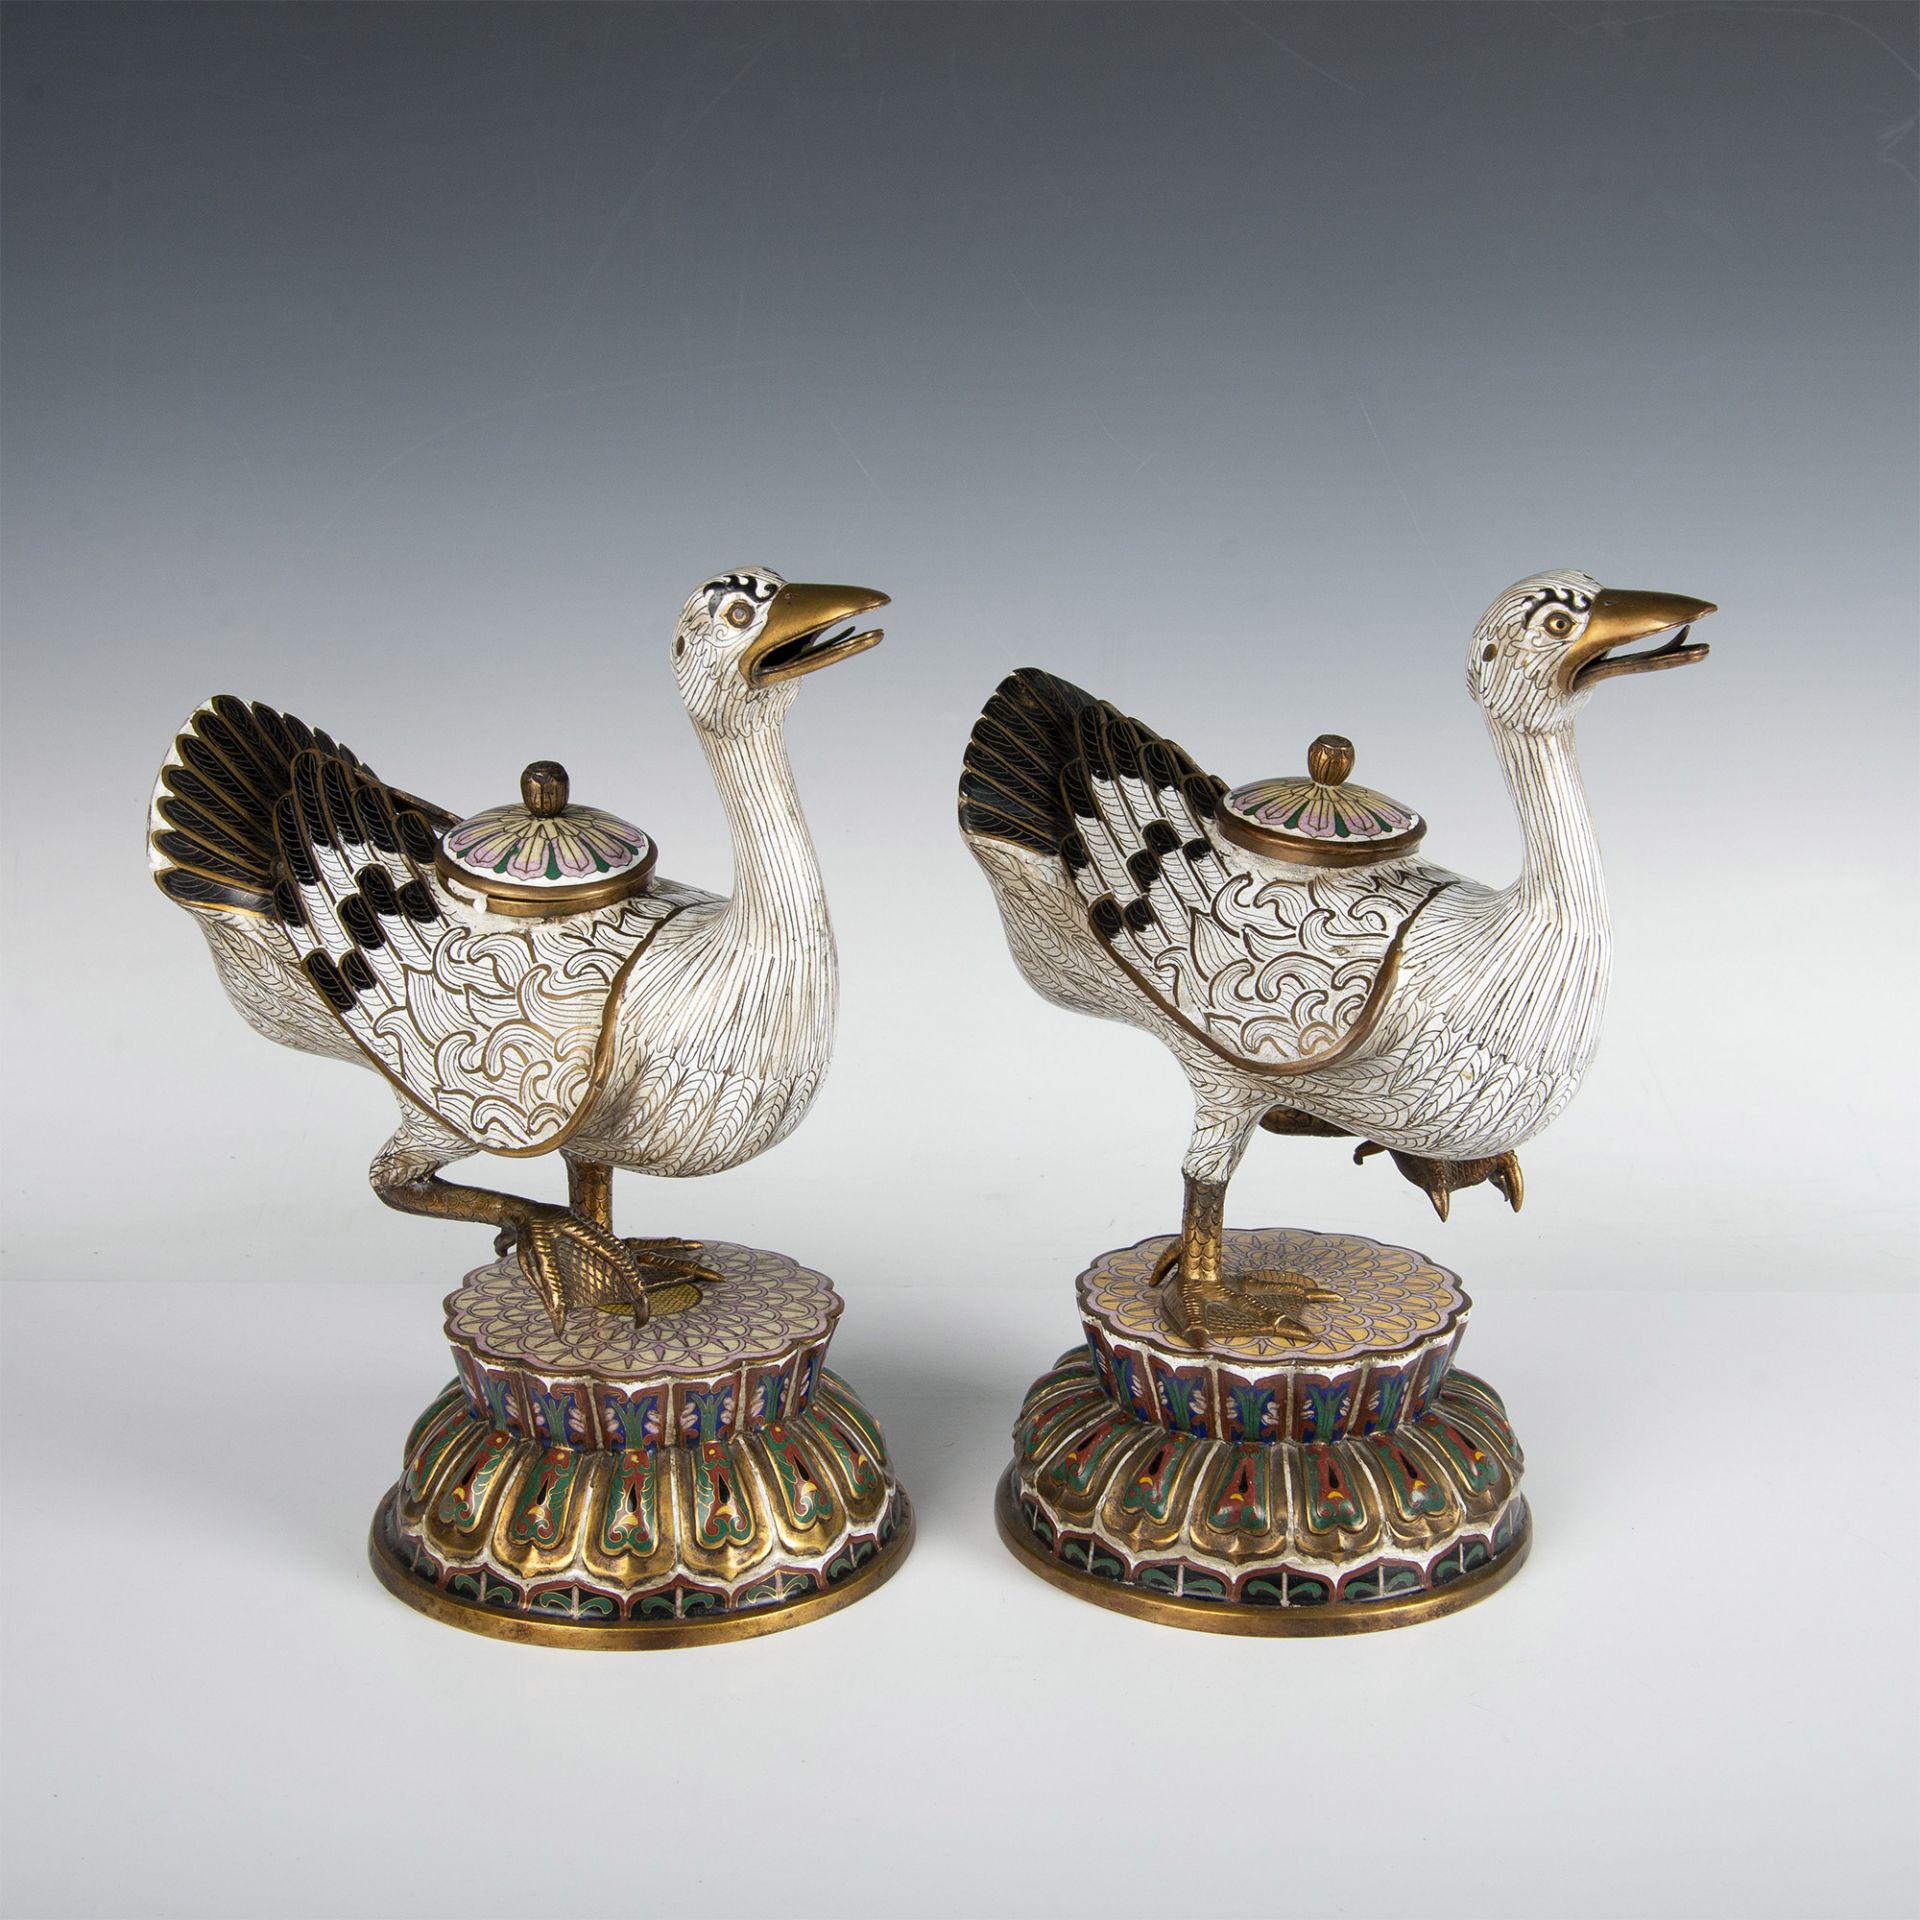 Pair of Chinese Cloisonne Duck Censers - Image 10 of 11